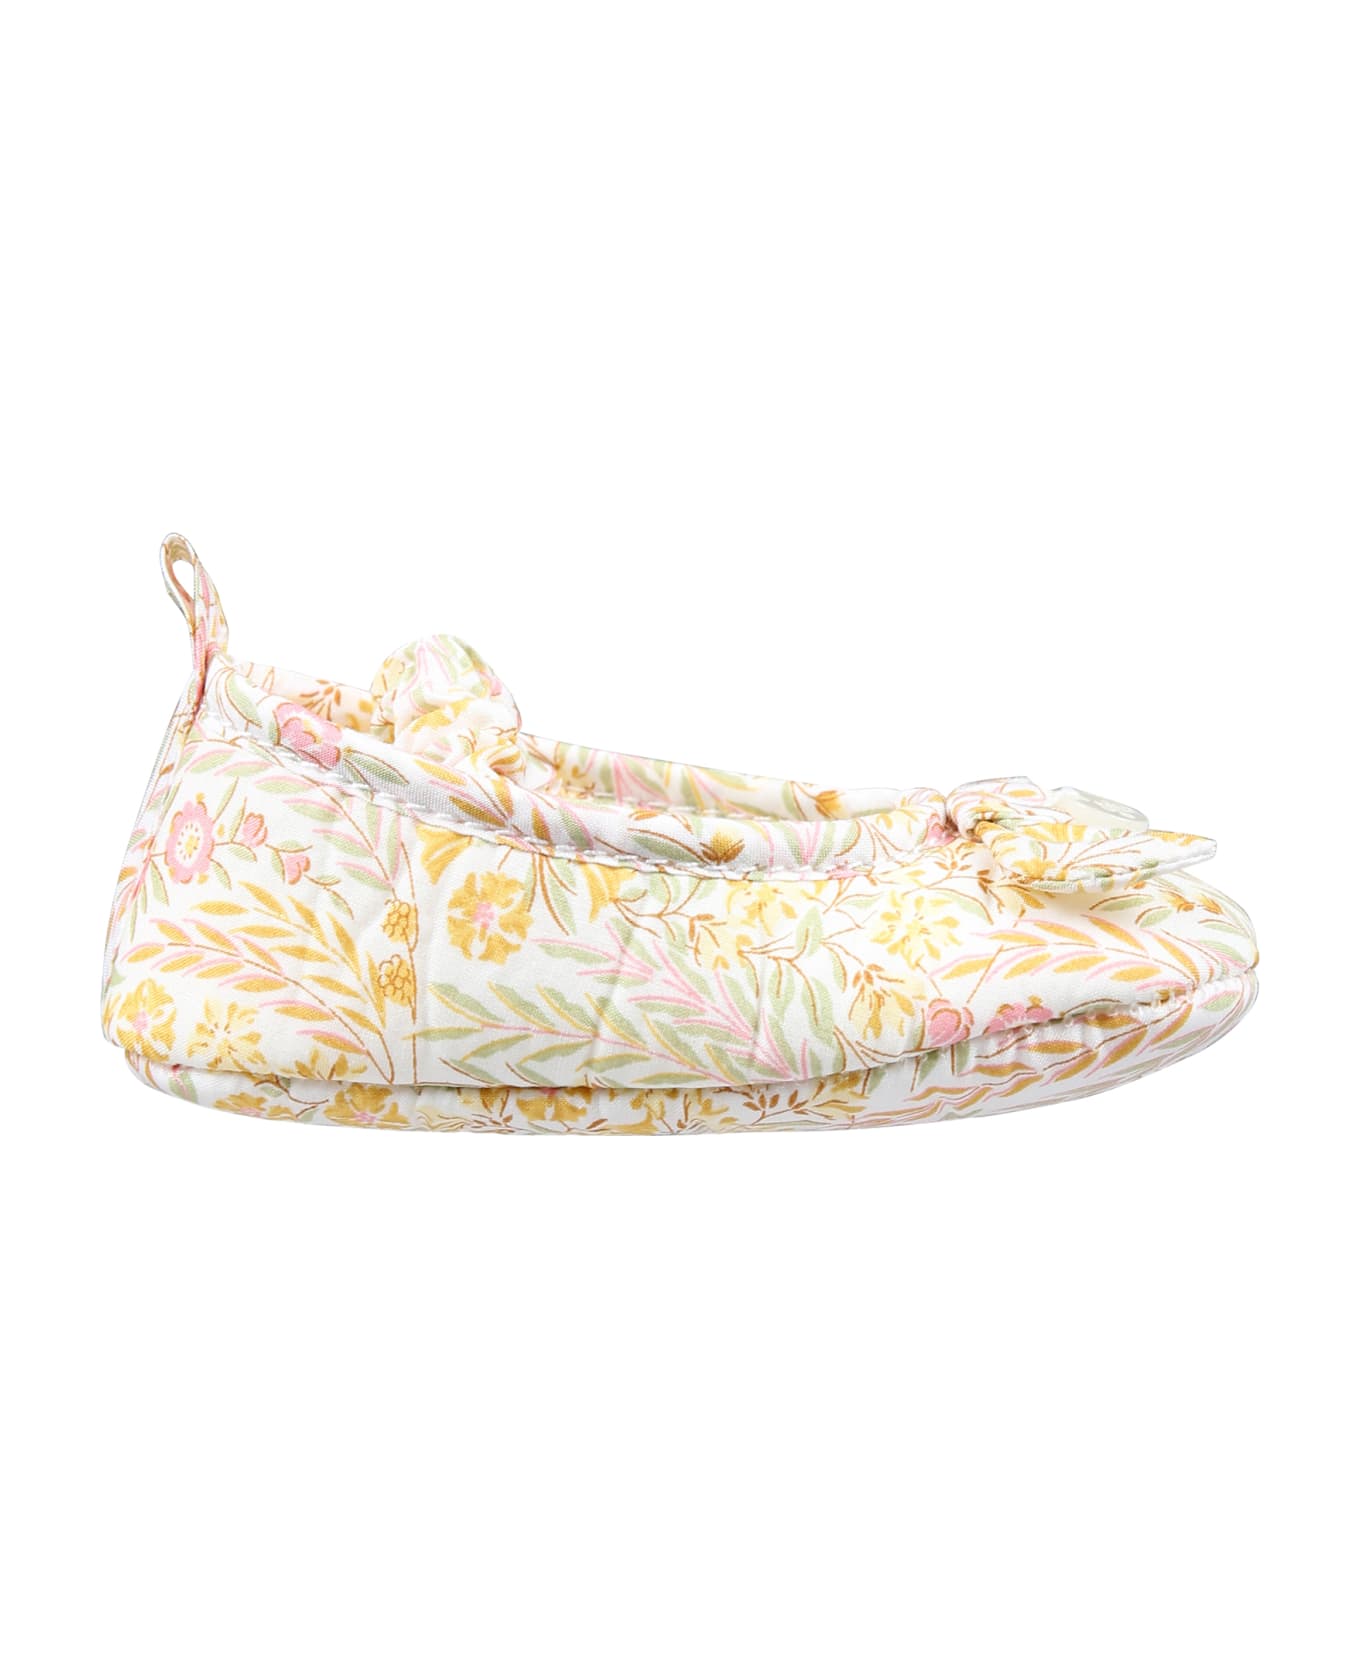 Tartine et Chocolat Ivory Ballet Flats For Baby Girl With A Liberty Fabric - Ivory シューズ